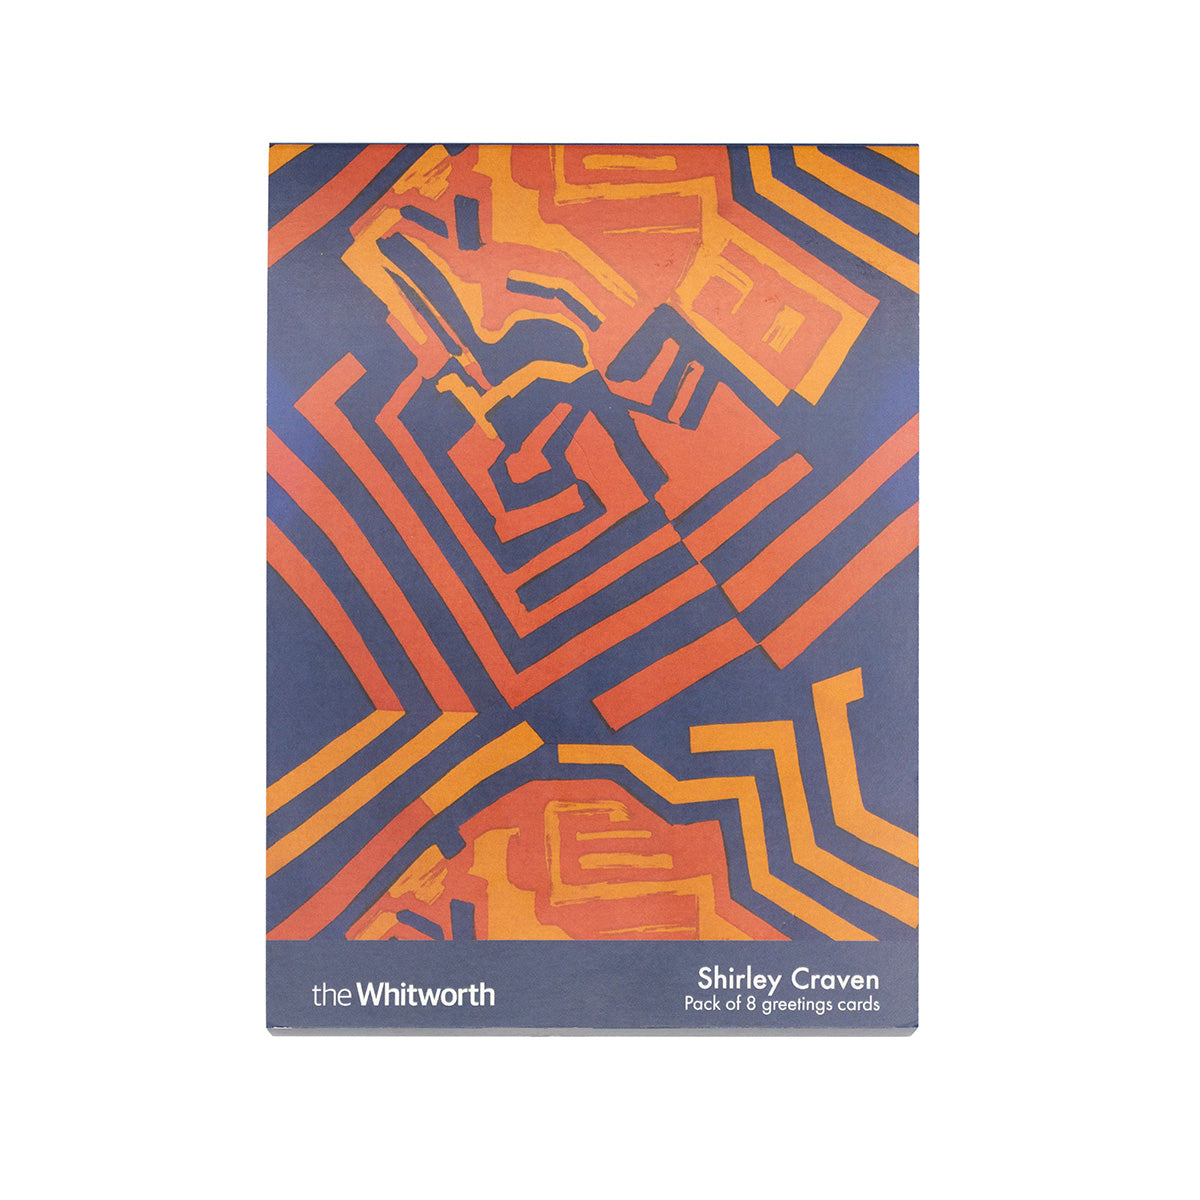 Front cover of a greetings card pack featuring a navy and orange geometric design by Shirley Craven.